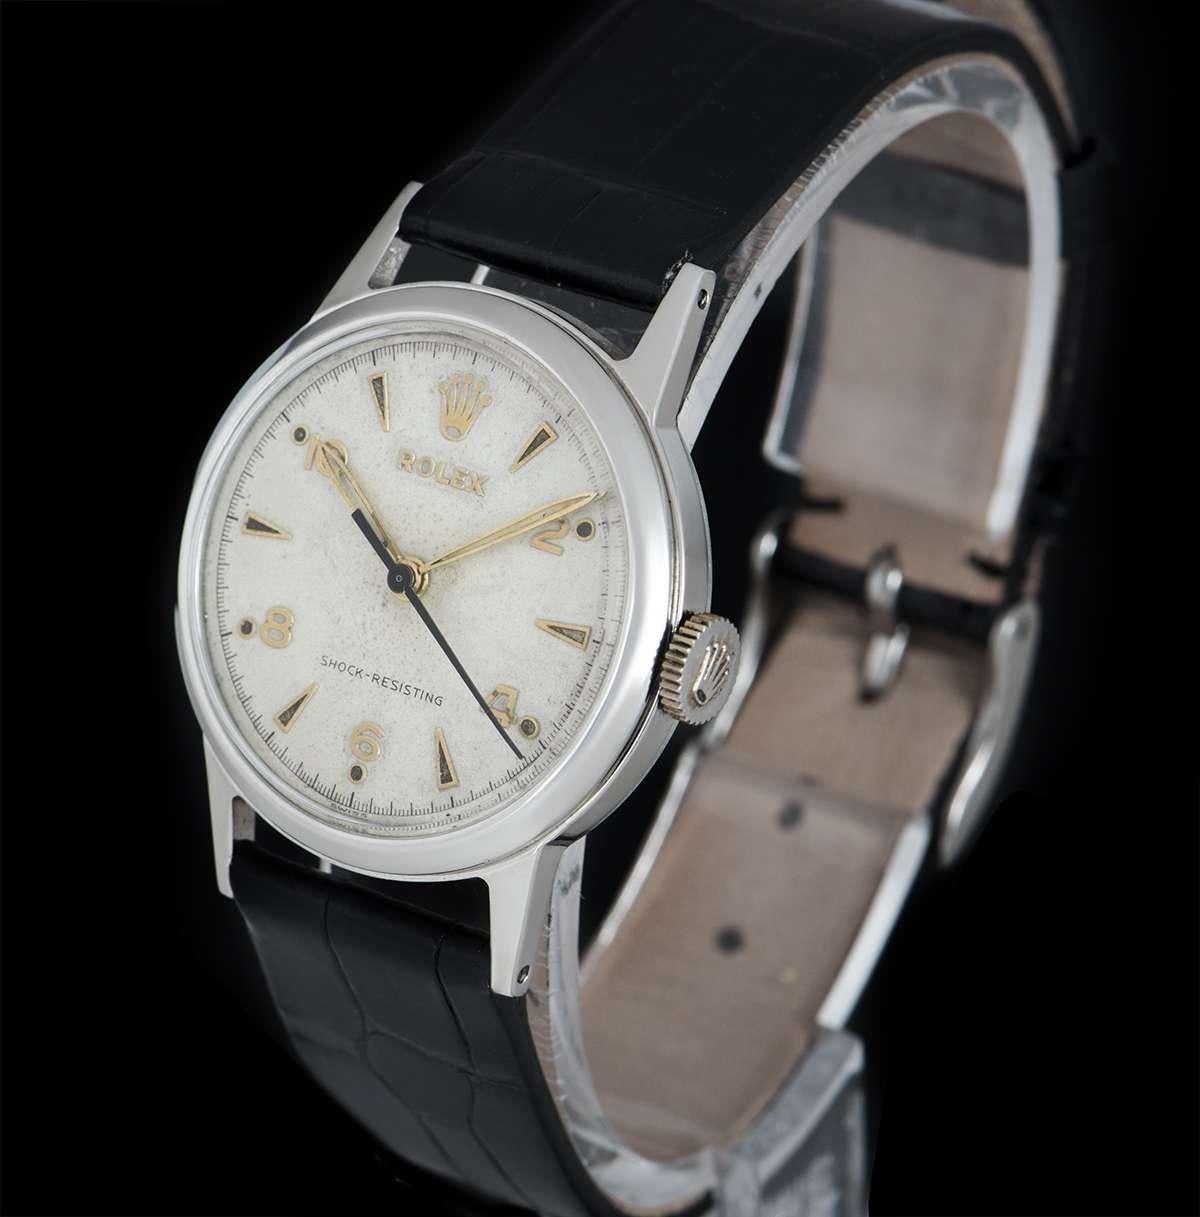 A Stainless Steel Shock Resisting Vintage Gents Wristwatch, white dial with applied hour markers and applied arabic numbers at 2,4,6,8 and 10, a fixed stainless steel smooth bezel, a black leather strap with a stainless steel pin buckle (both not by